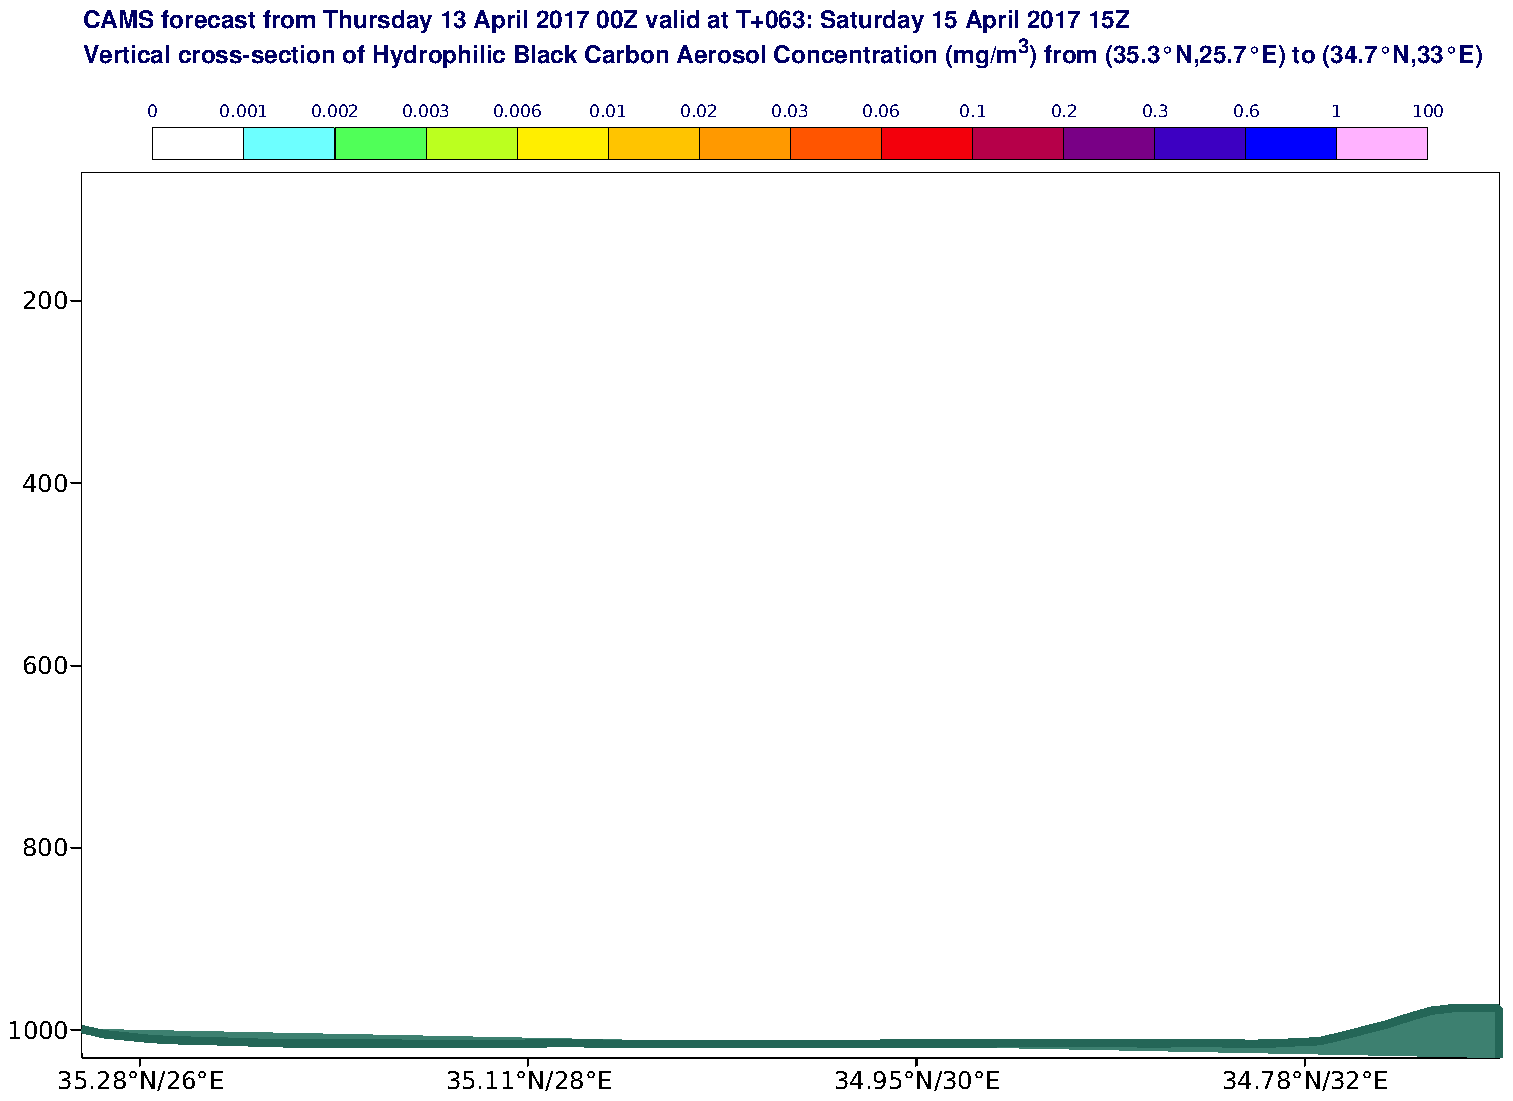 Vertical cross-section of Hydrophilic Black Carbon Aerosol Concentration (mg/m3) valid at T63 - 2017-04-15 15:00